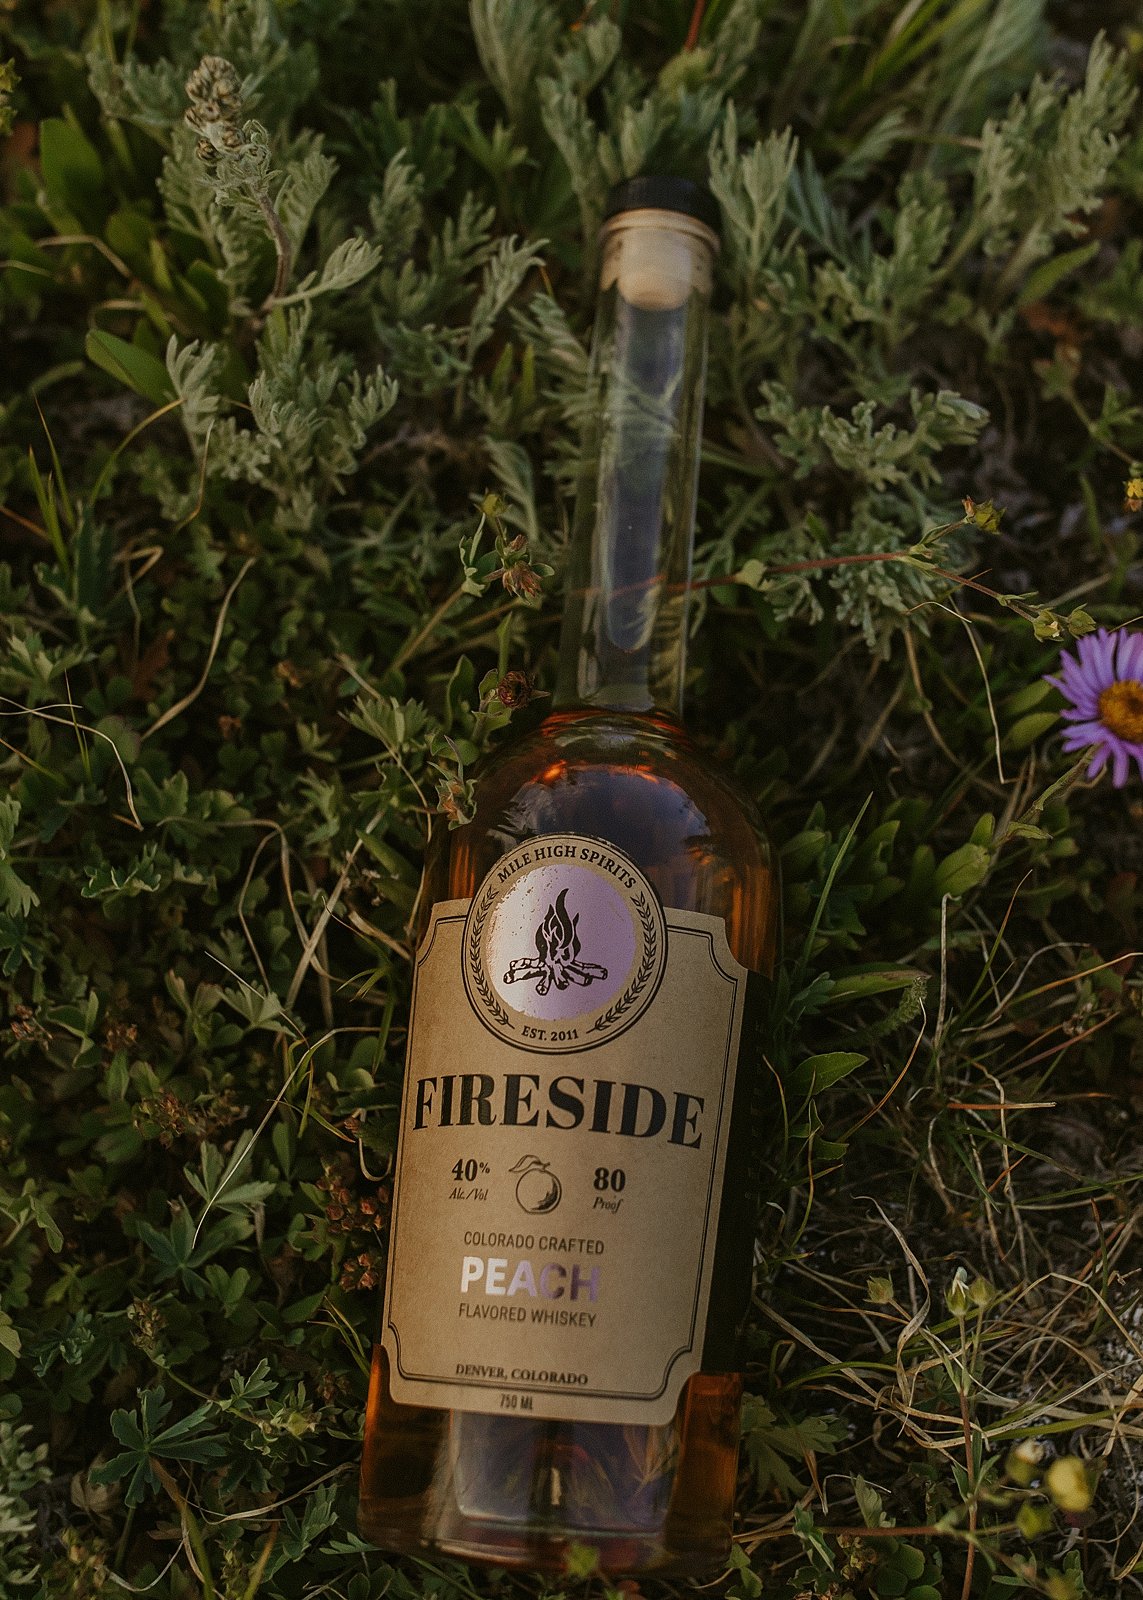 mile high spirits fireside whiskey, colorado peach whiskey, quandary mountain hiking elopement, tenmile range adventurous elopement, whiskey elopement